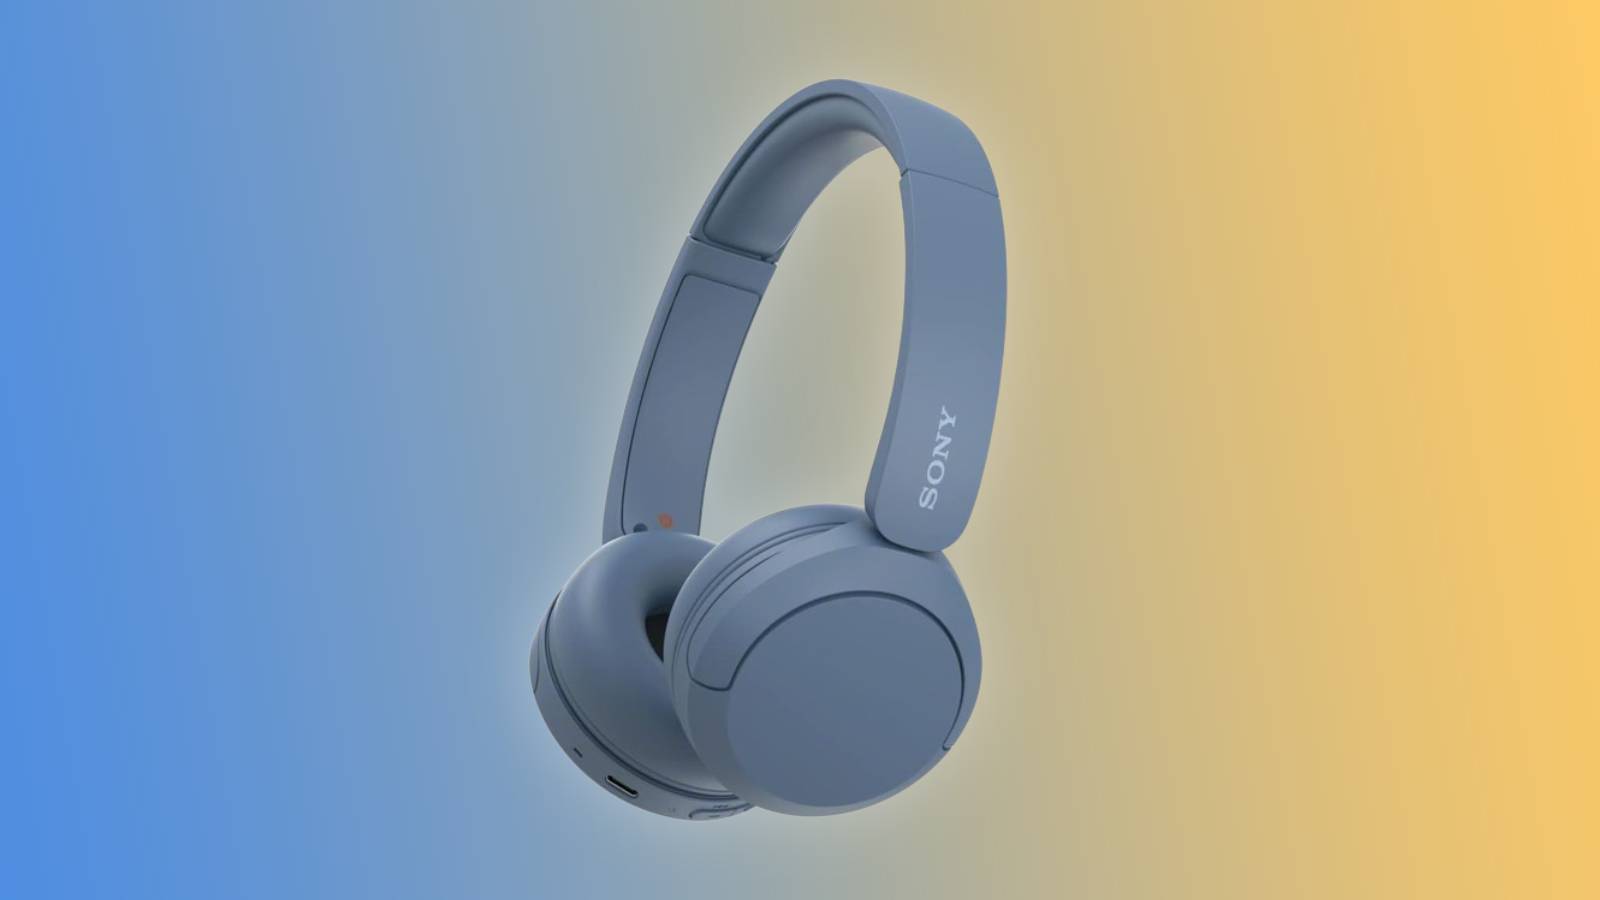 Sony headphones on a blue and yellow gradient background